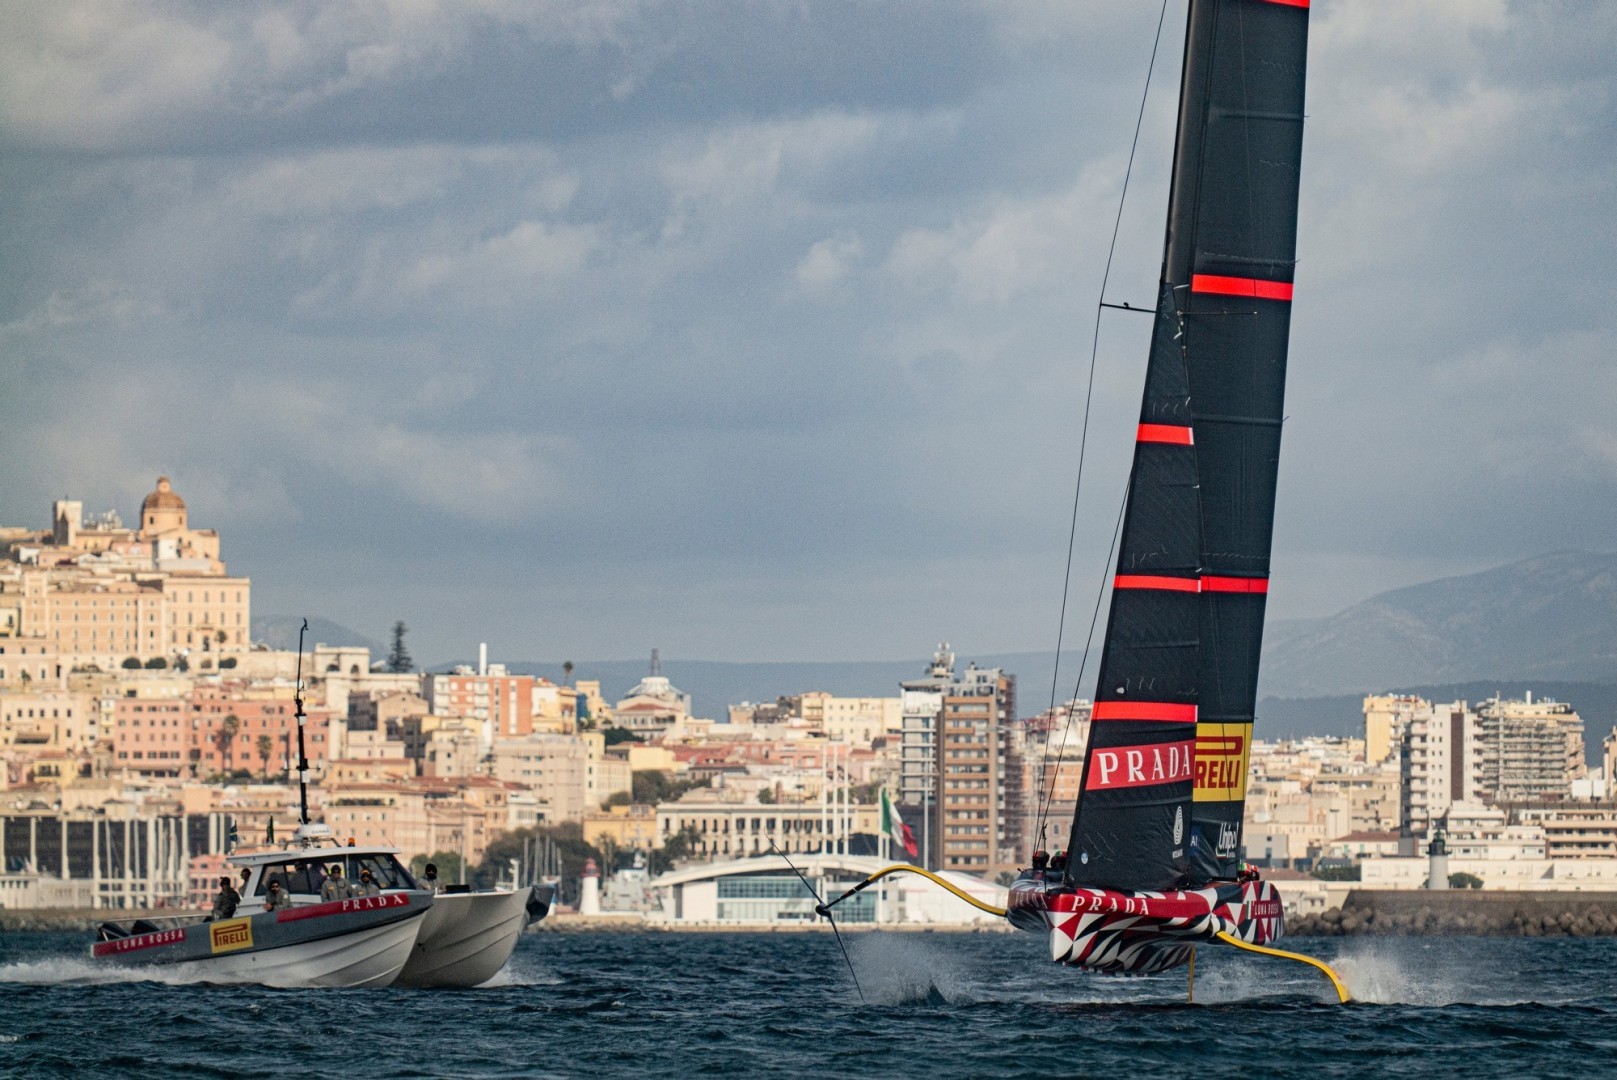 Luna Rossa put the pressure in the other teams